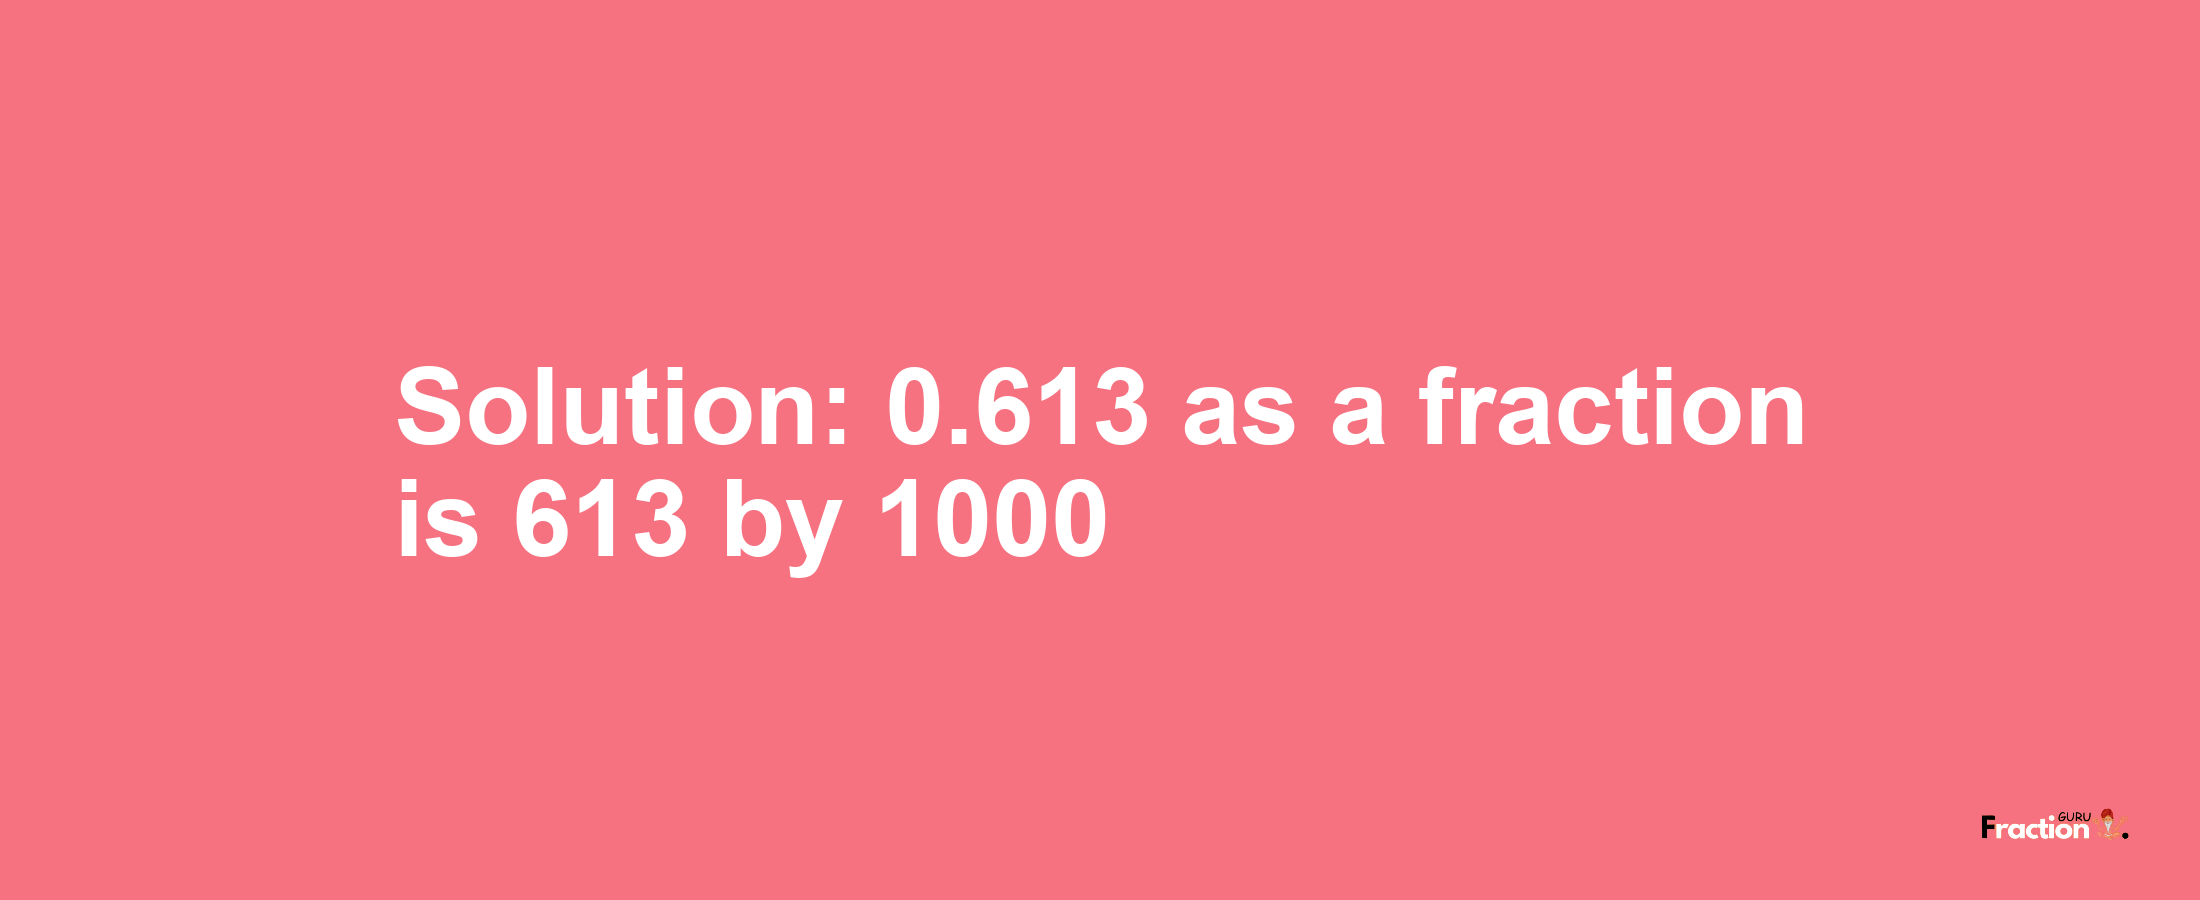 Solution:0.613 as a fraction is 613/1000